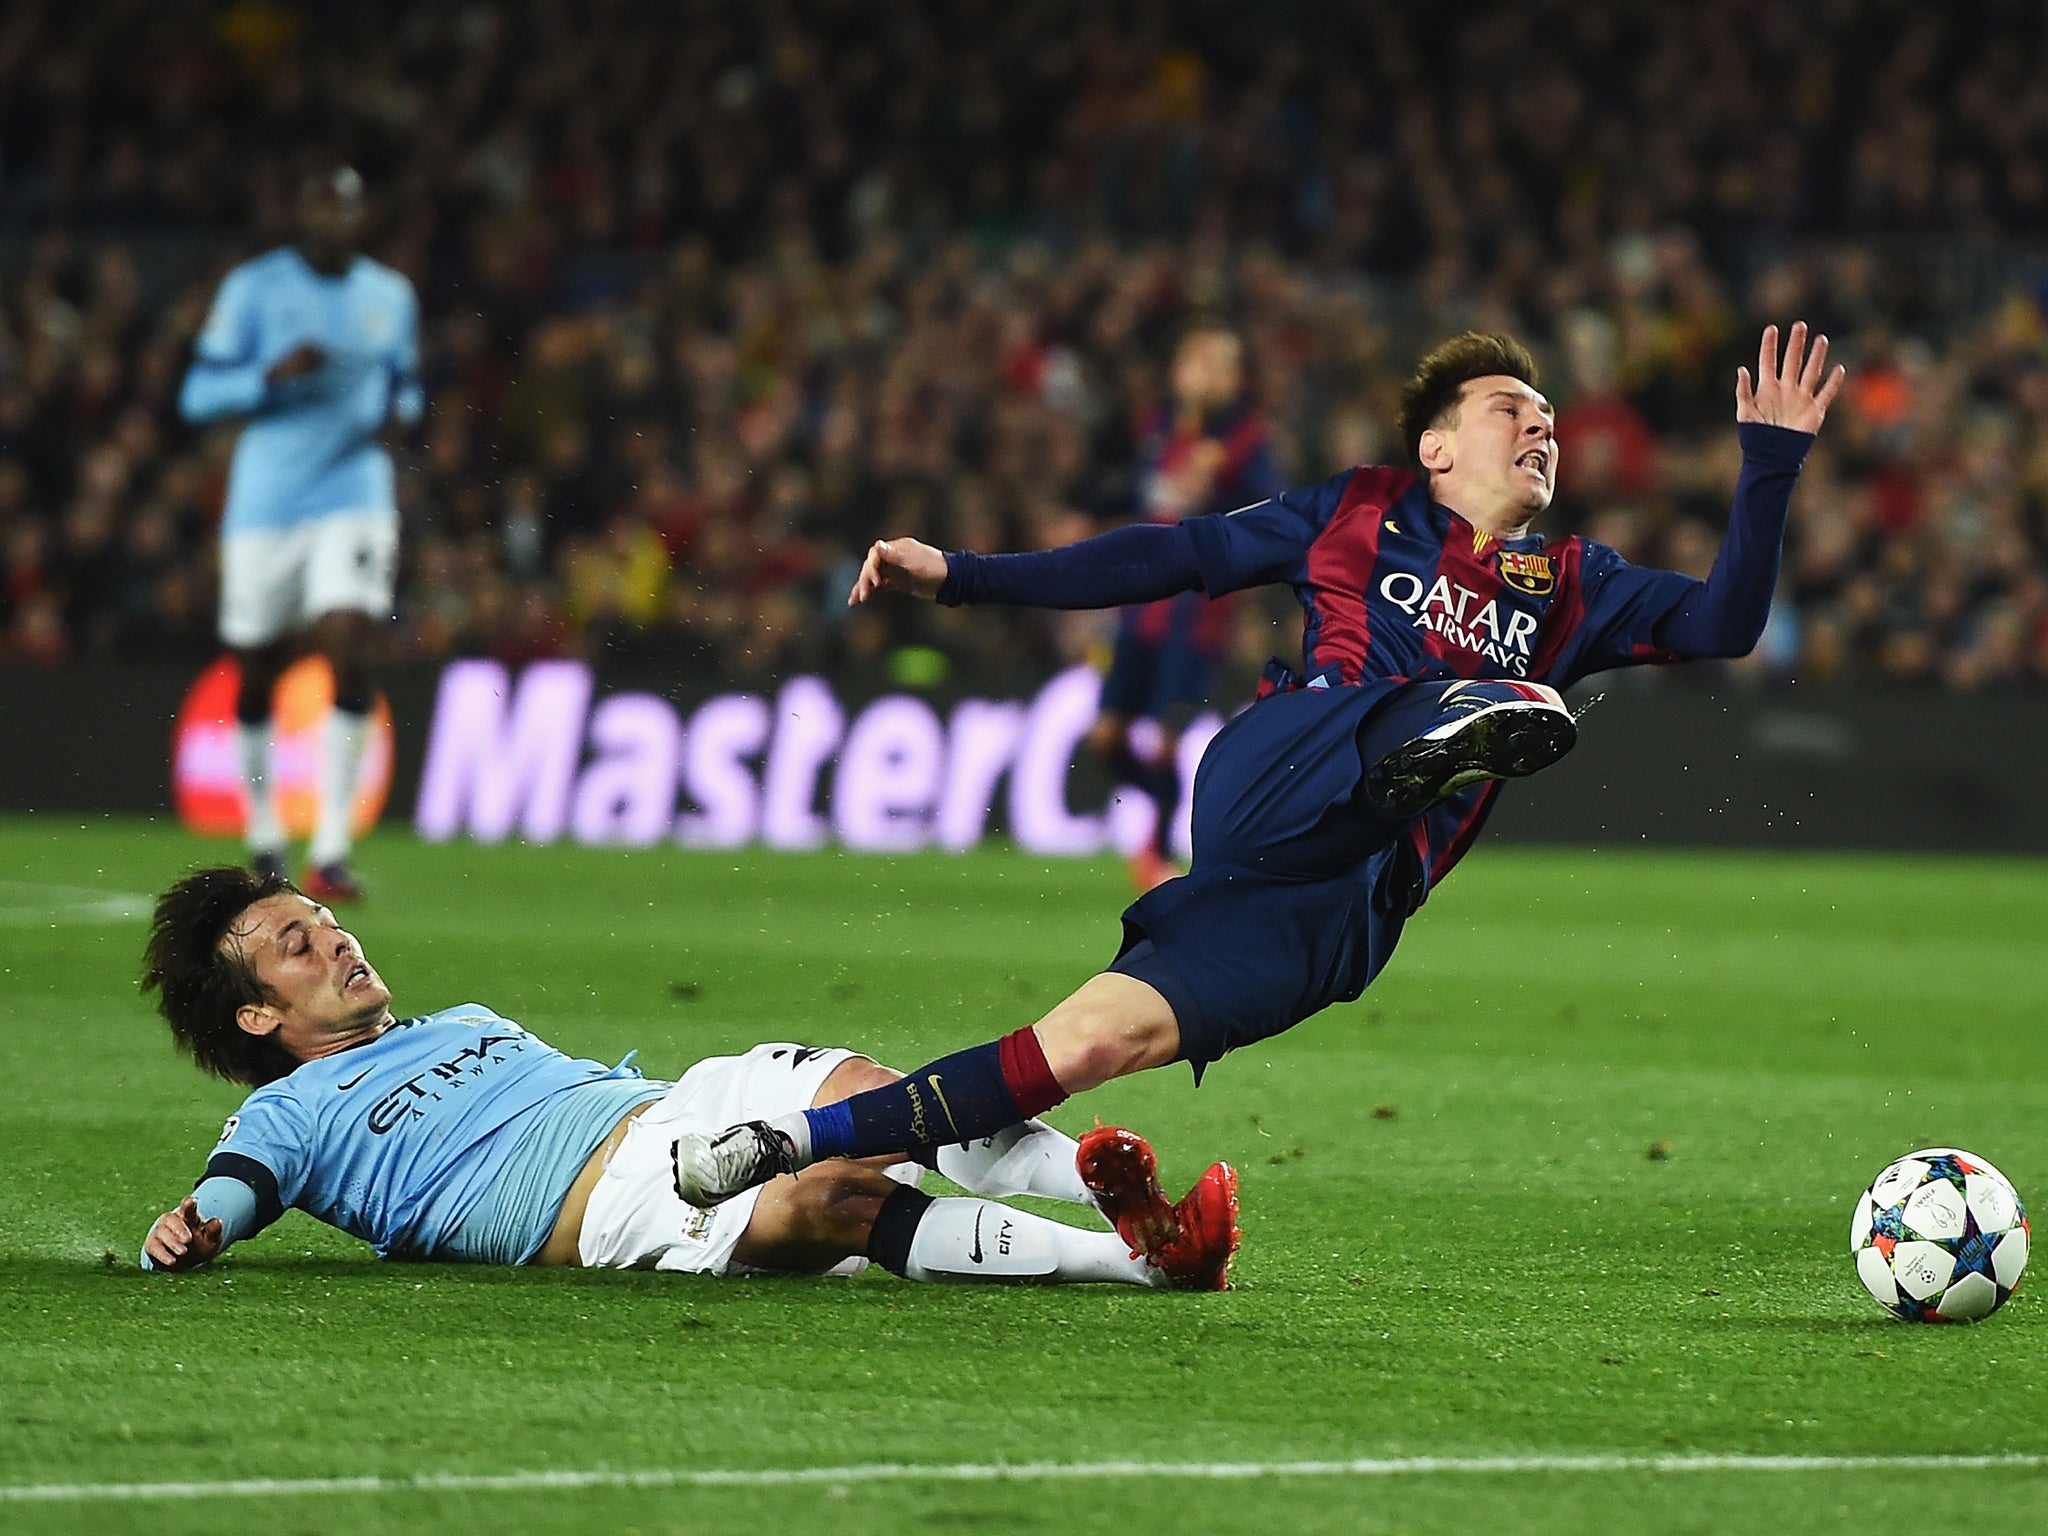 The only way City could stop Messi was by fouling him